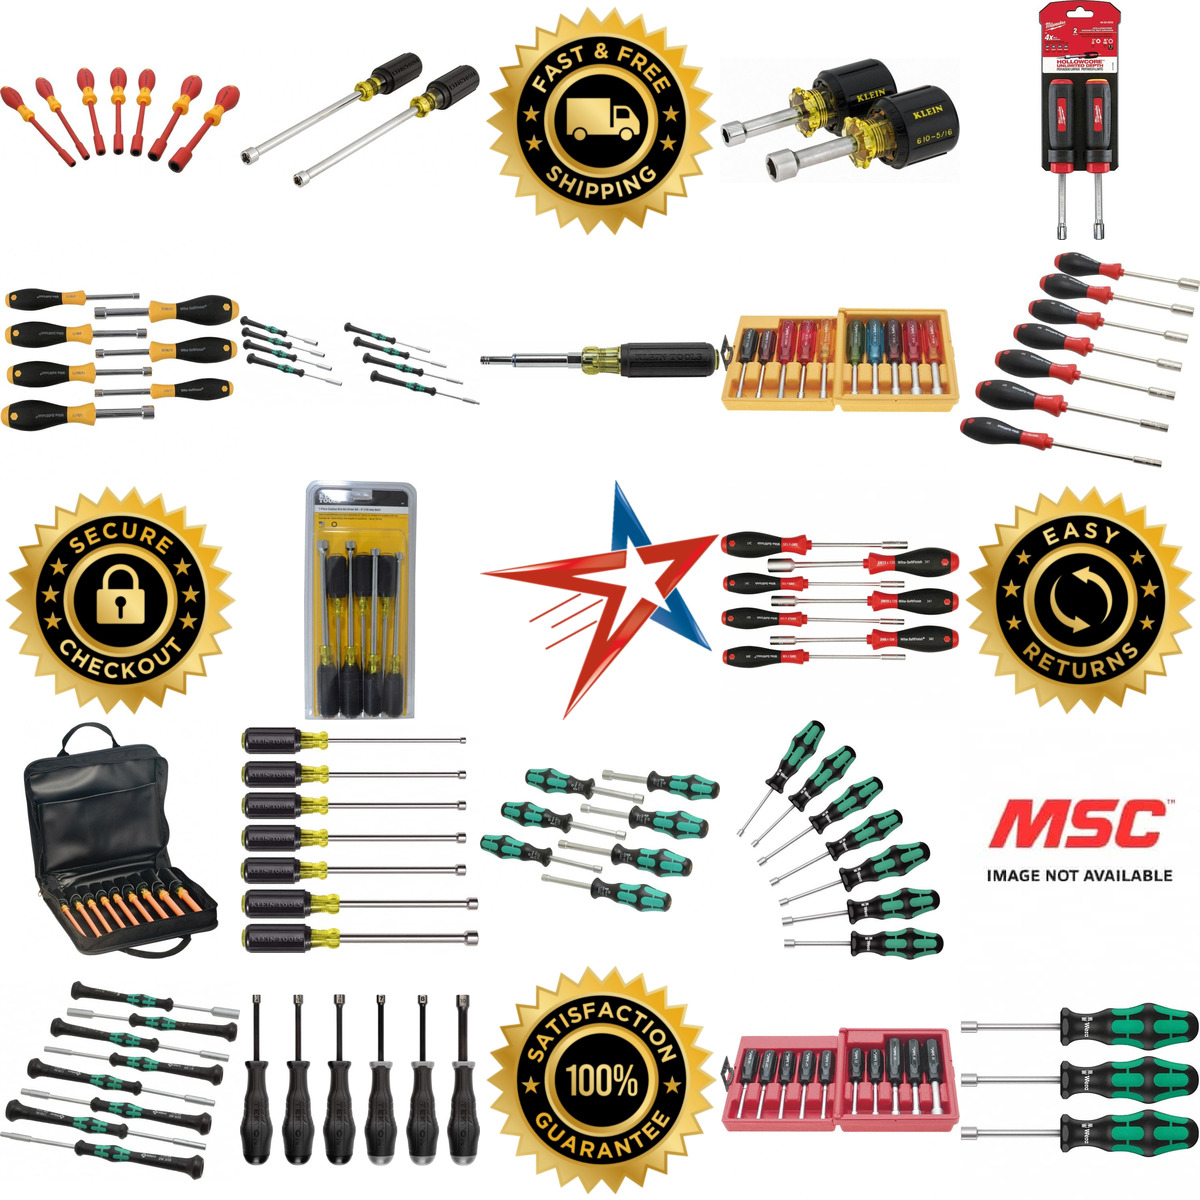 A selection of Nutdriver Sets products on GoVets